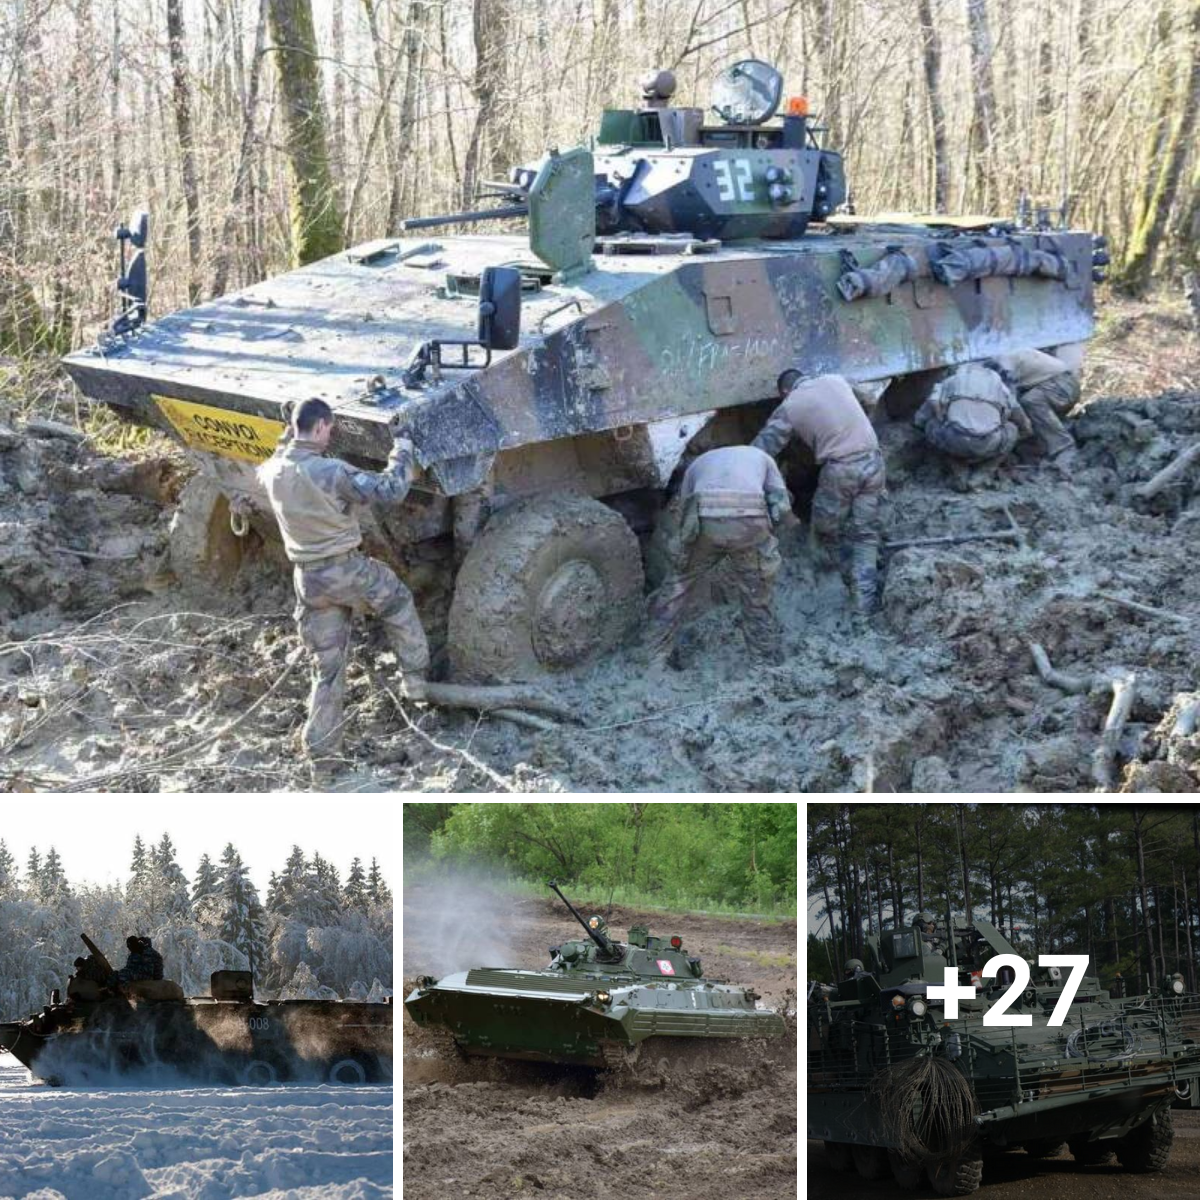 Getting Around in Deep Snow and Swamps: Are Tracked Vehicles Better than Wheeled Armored Vehicles?